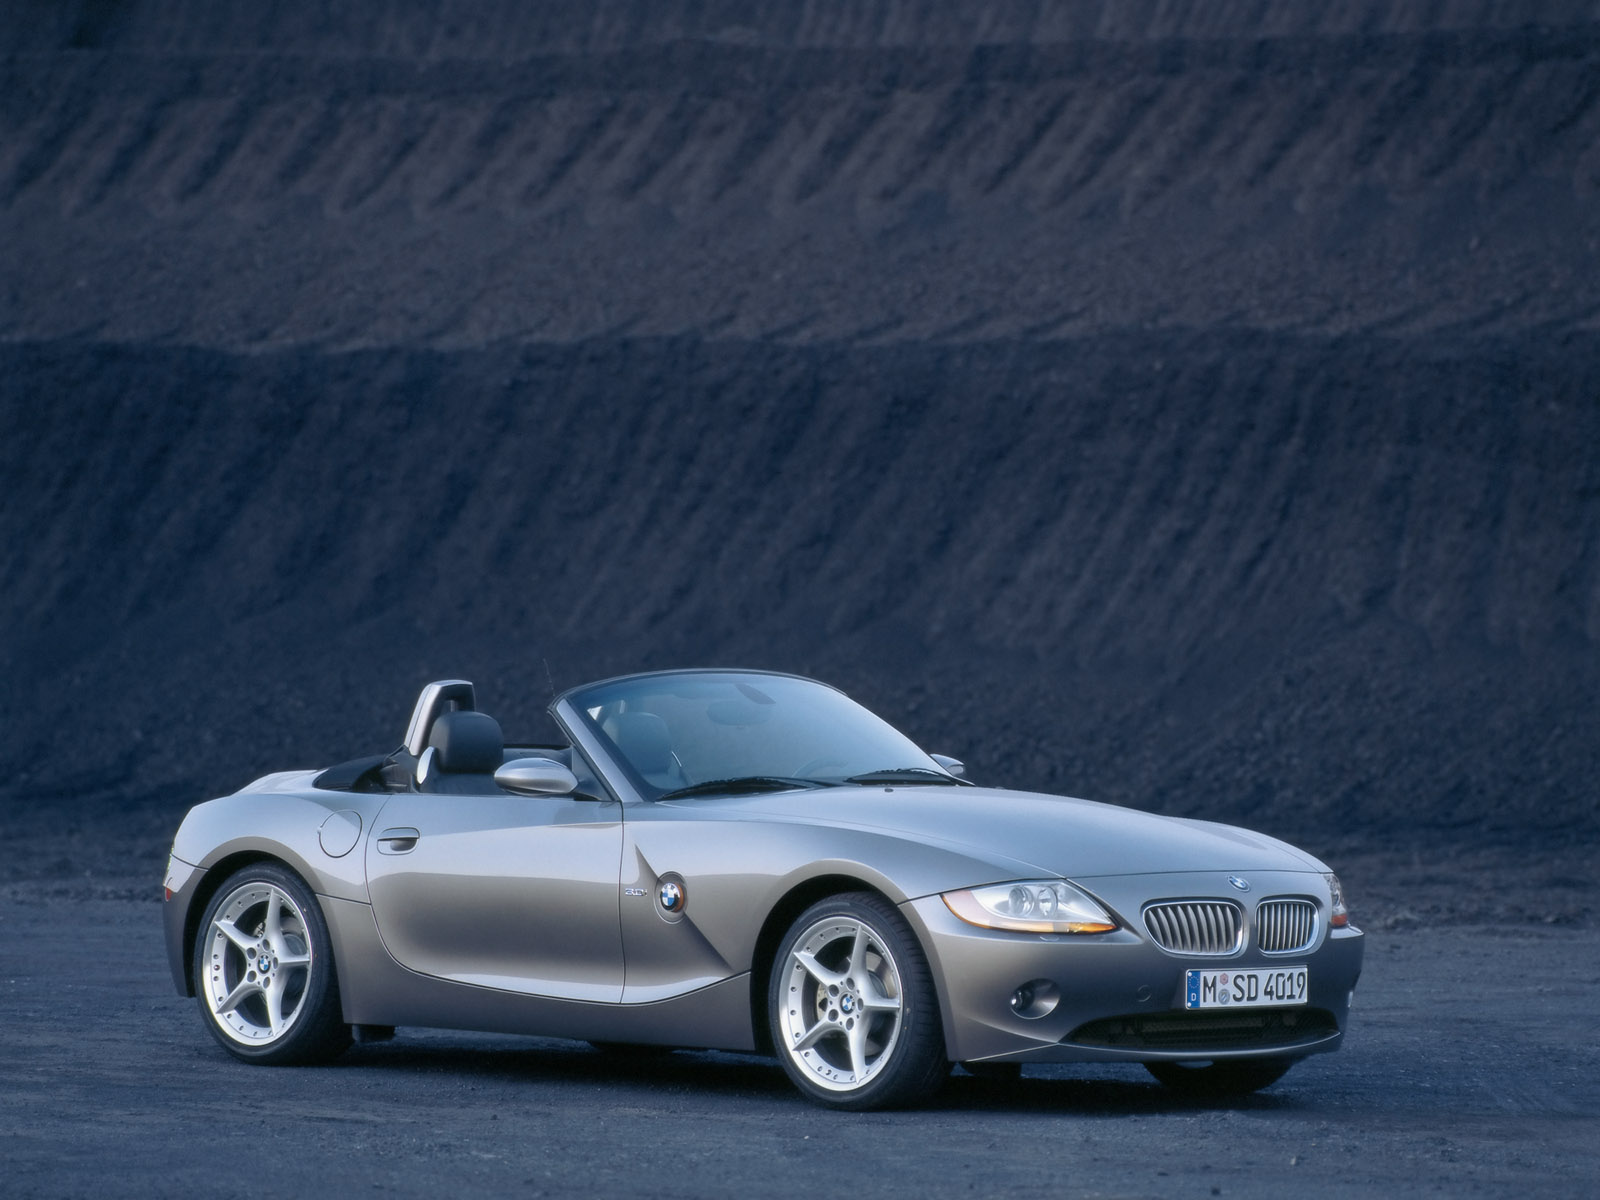 Bmw Z4 Roadster Front Angle Wallpaper